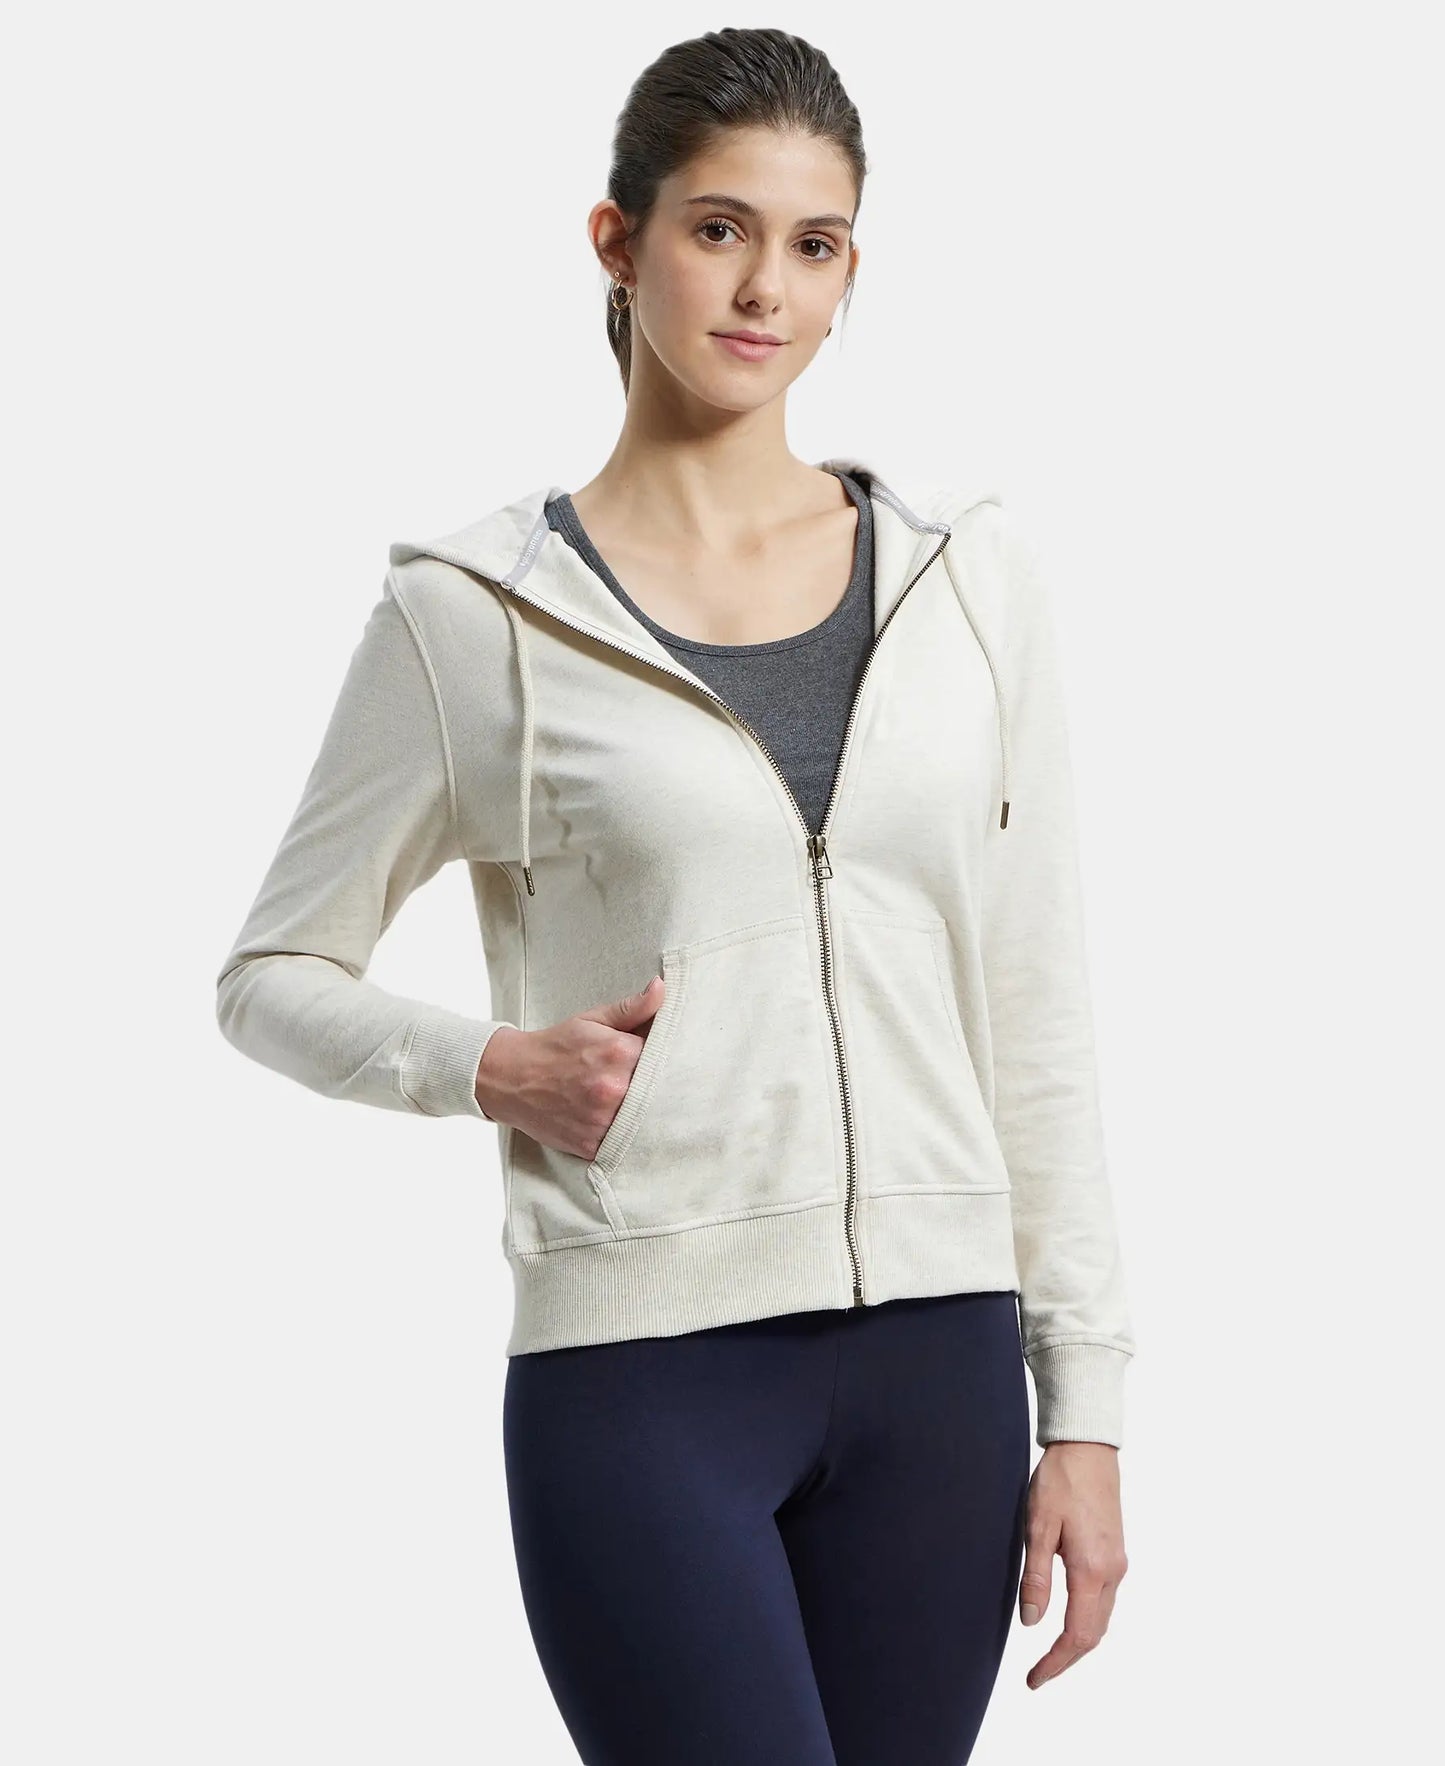 Super Combed Cotton French Terry Fabric Hoodie Jacket with Side Pockets - Cream Melange-2